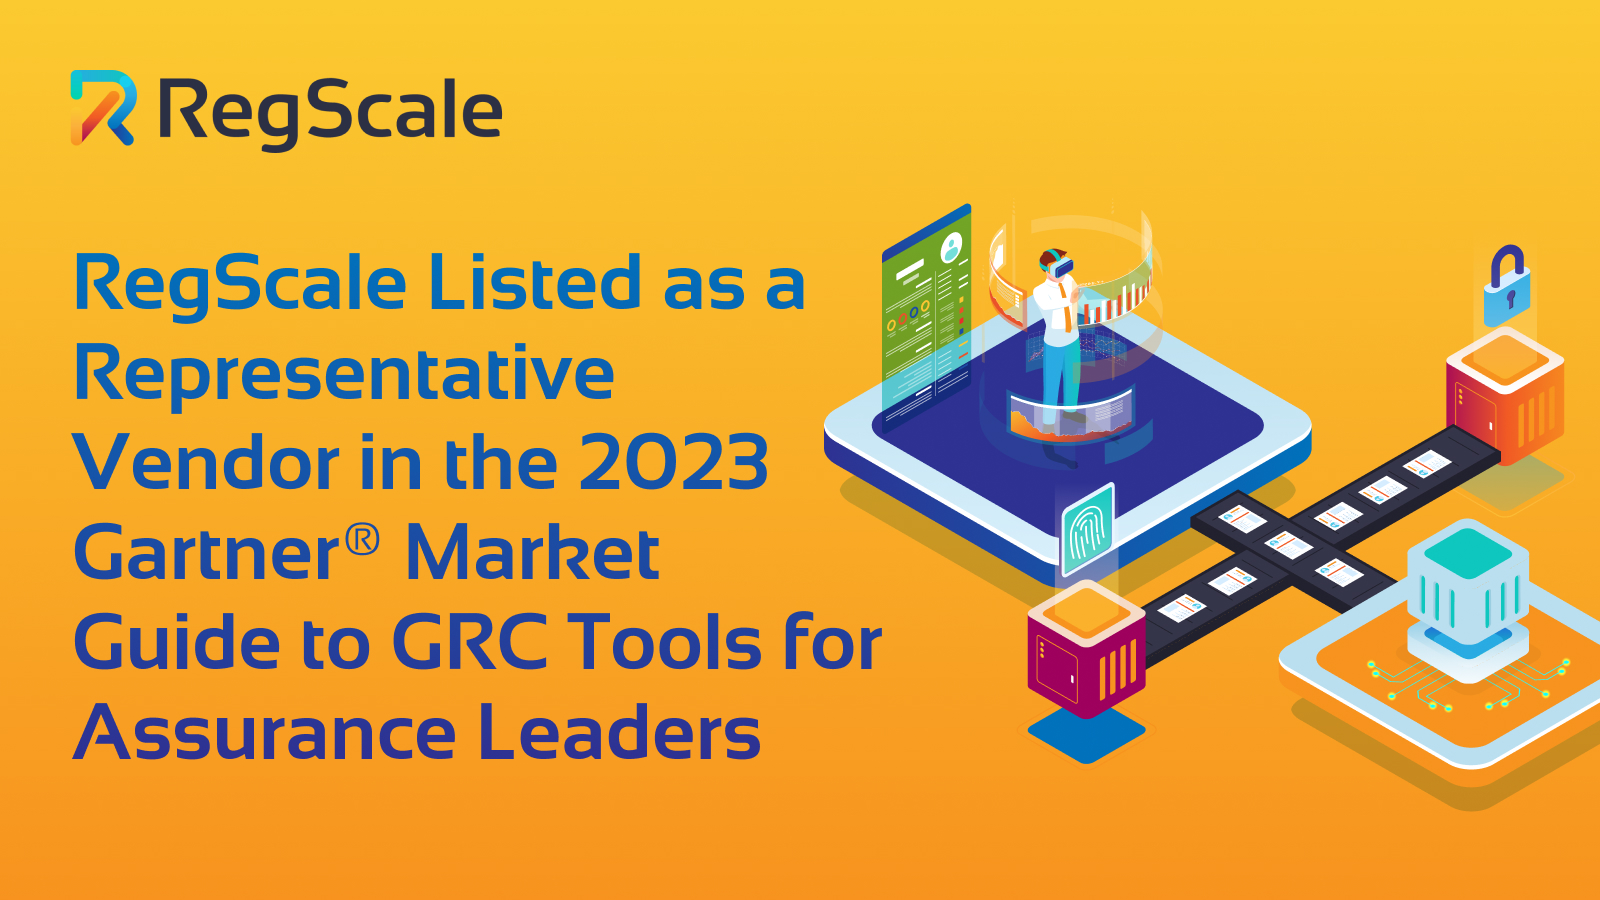 RegScale Recognized as a Representative Vendor in the 2023 Gartner® Market Guide to GRC Tools for Assurance Leaders